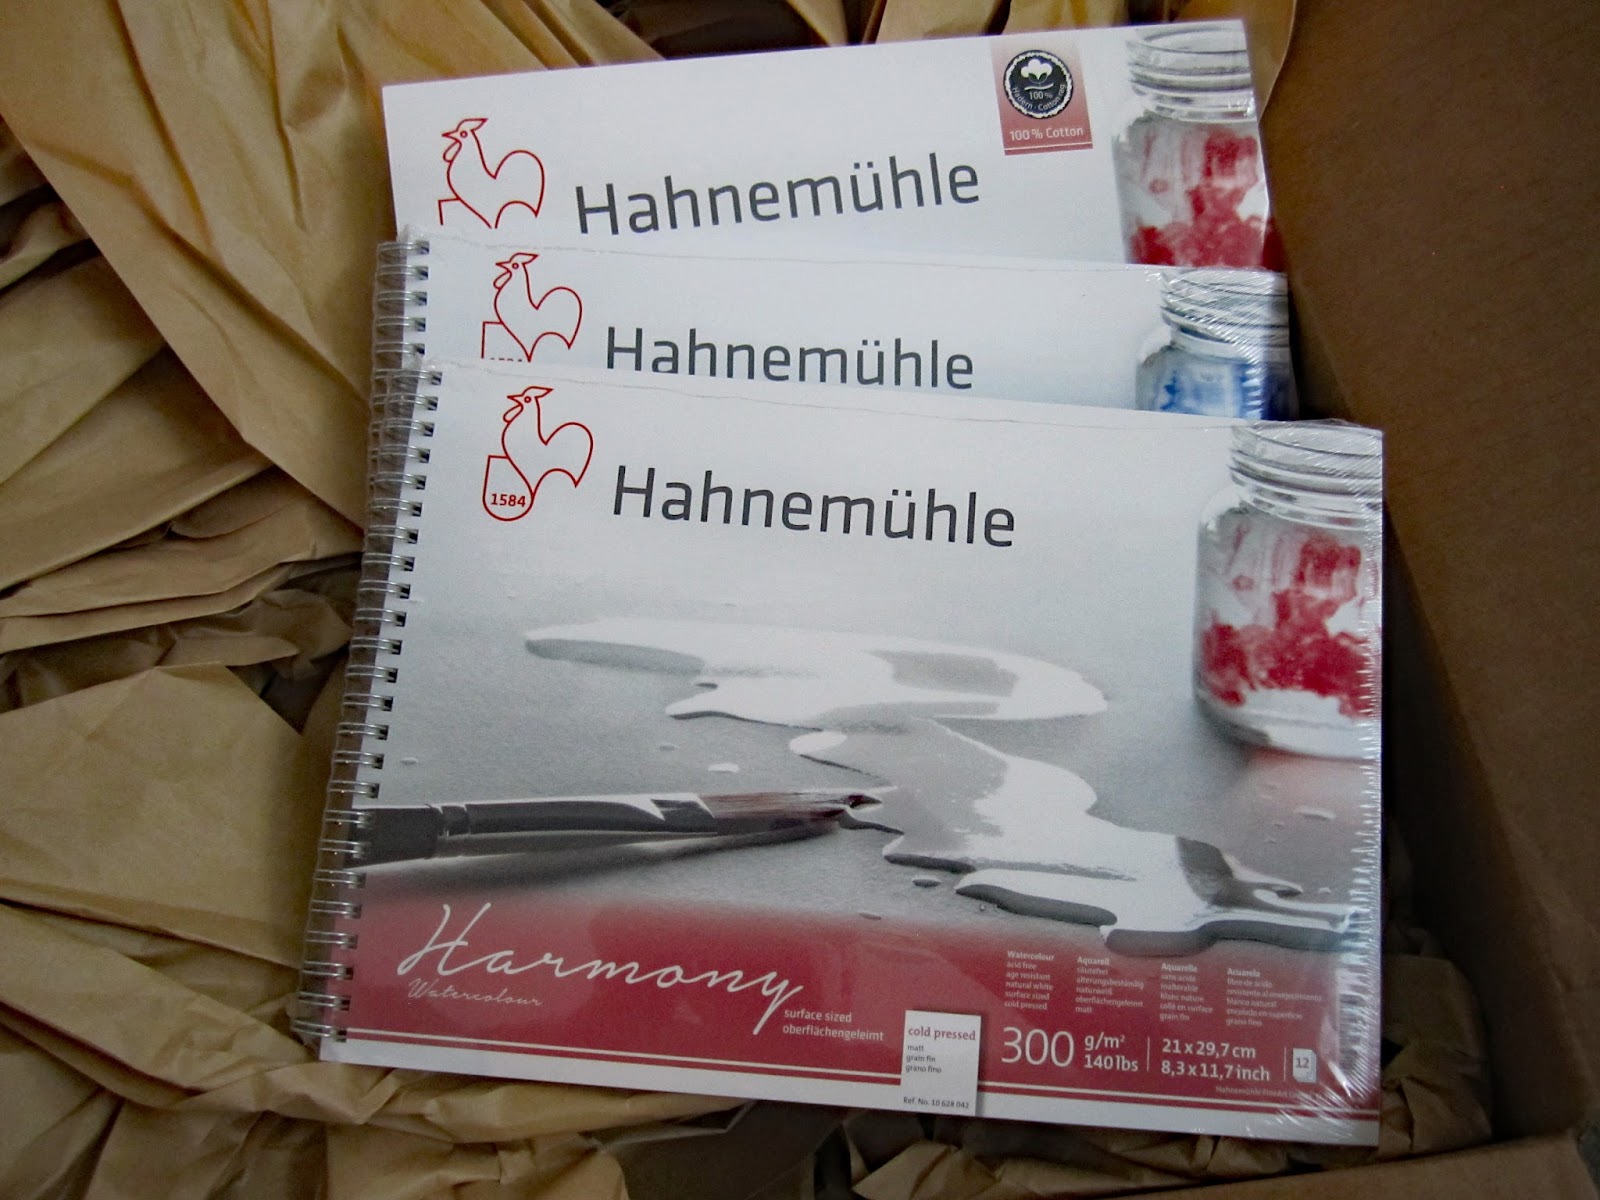 Review - Hahnemühle Harmony Cold Pressed Watercolour Paper - Spiral Bound  #Hahnemühle_USA #HarmonyWatercolor #Watercolor @Hahnemühle_USA  #WorldWatercolorGroup